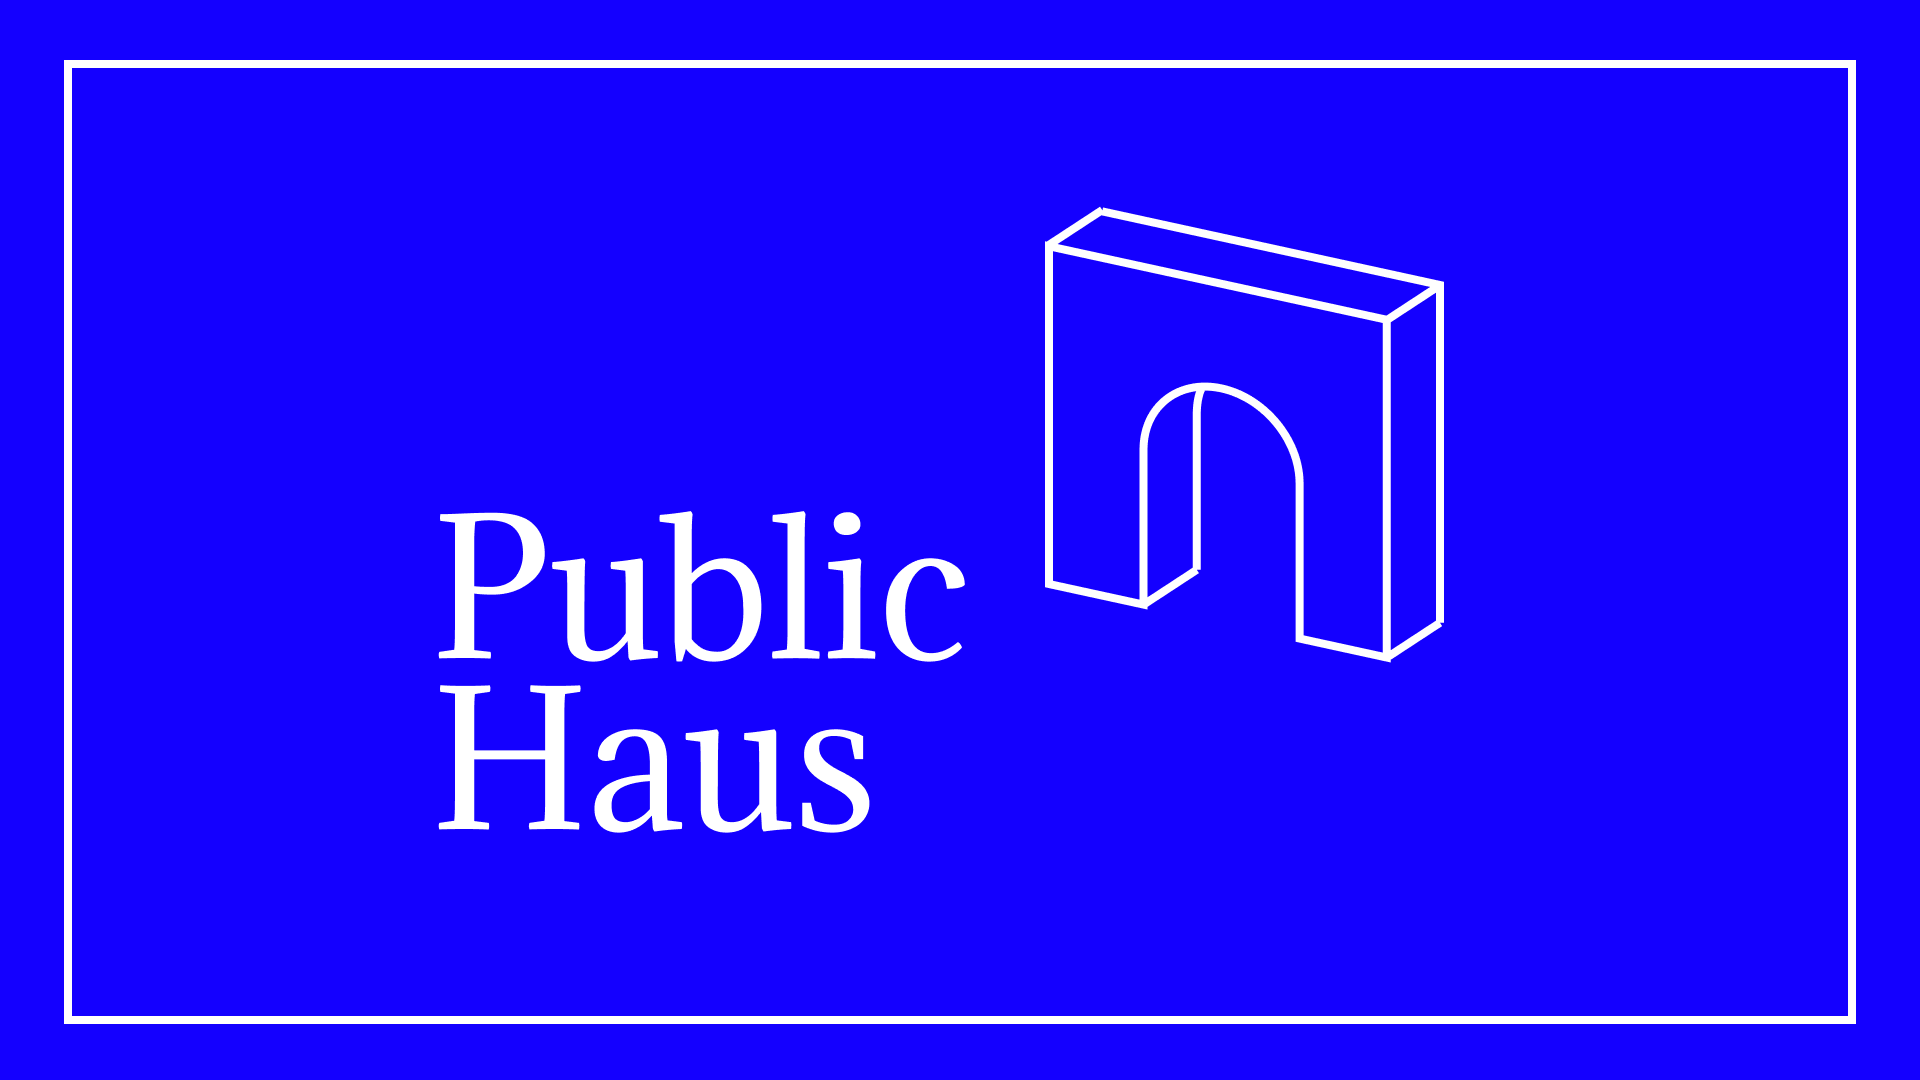 PublicHaus is the governing body of DAOhaus